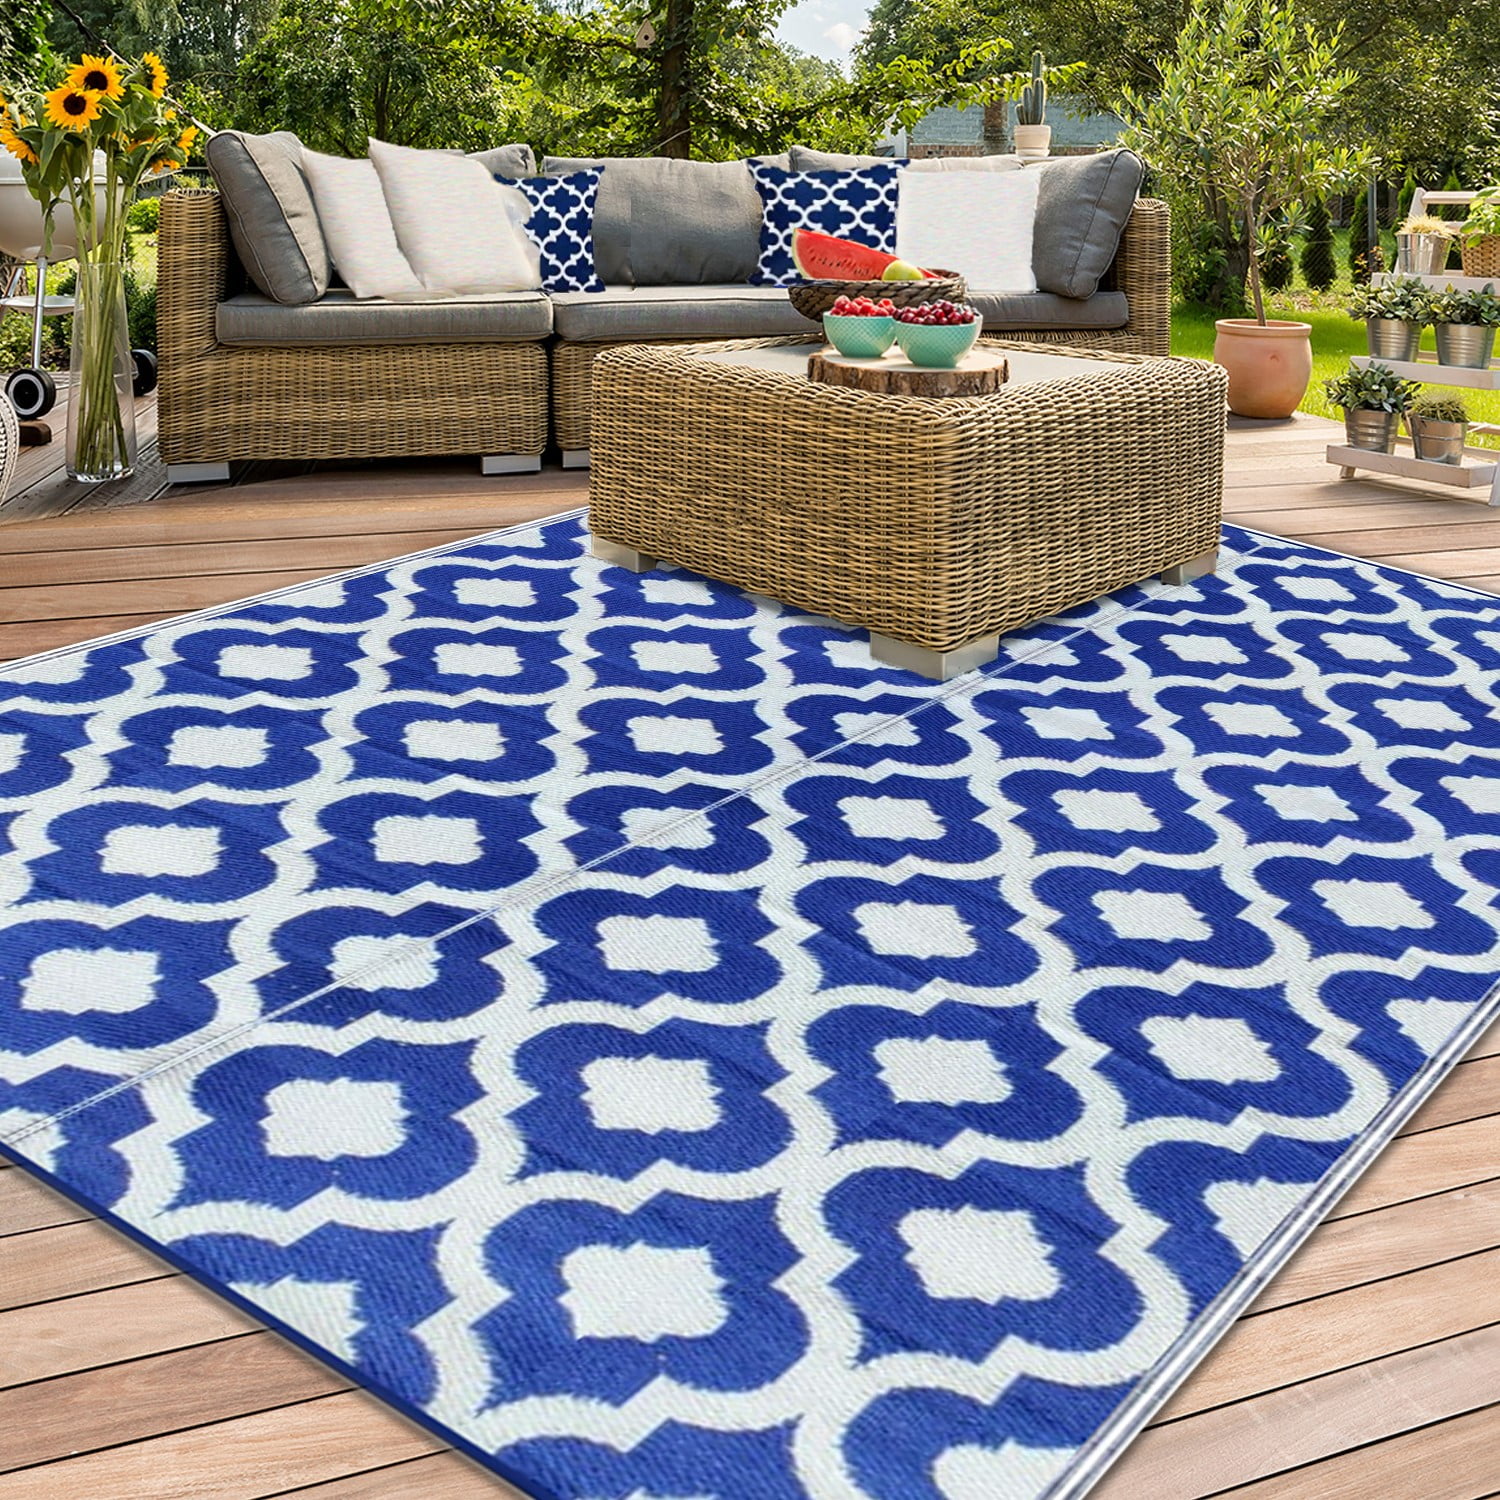 BalajeesUSA Outdoor rugs Plastic straw patio rugs-5 by 7 feet. Blue  reversible mats waterproof rv camper mats patio rugs Clearance.477 